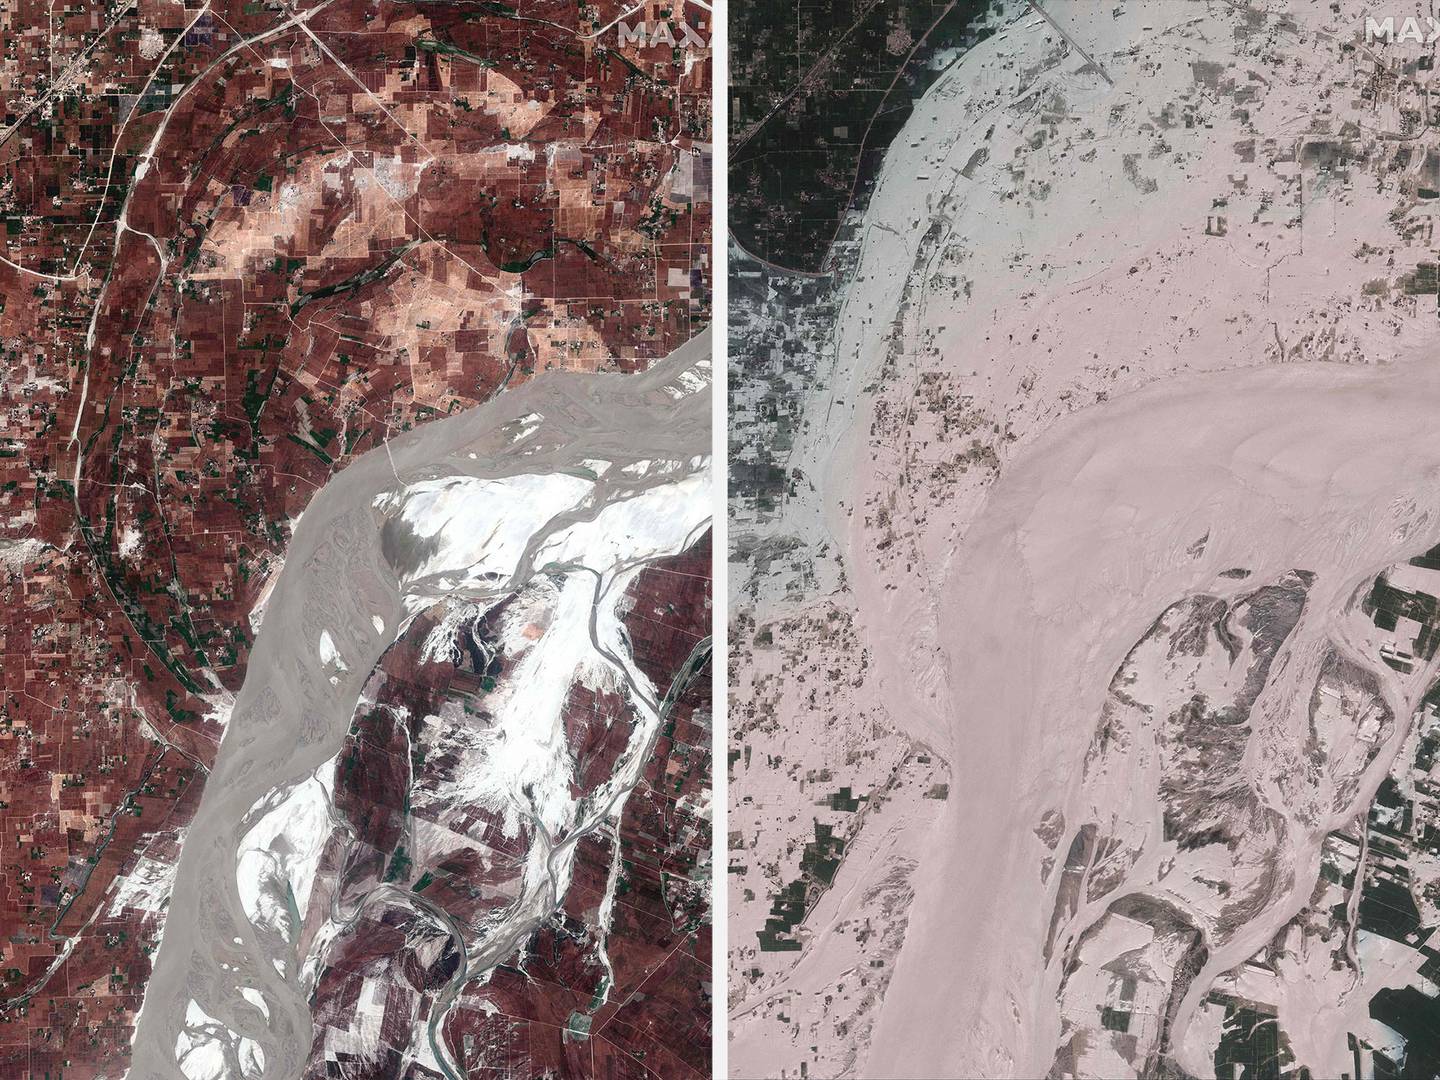 A composite of the Indus river, Pakistan, before and after the flooding. Reuters / Maxar